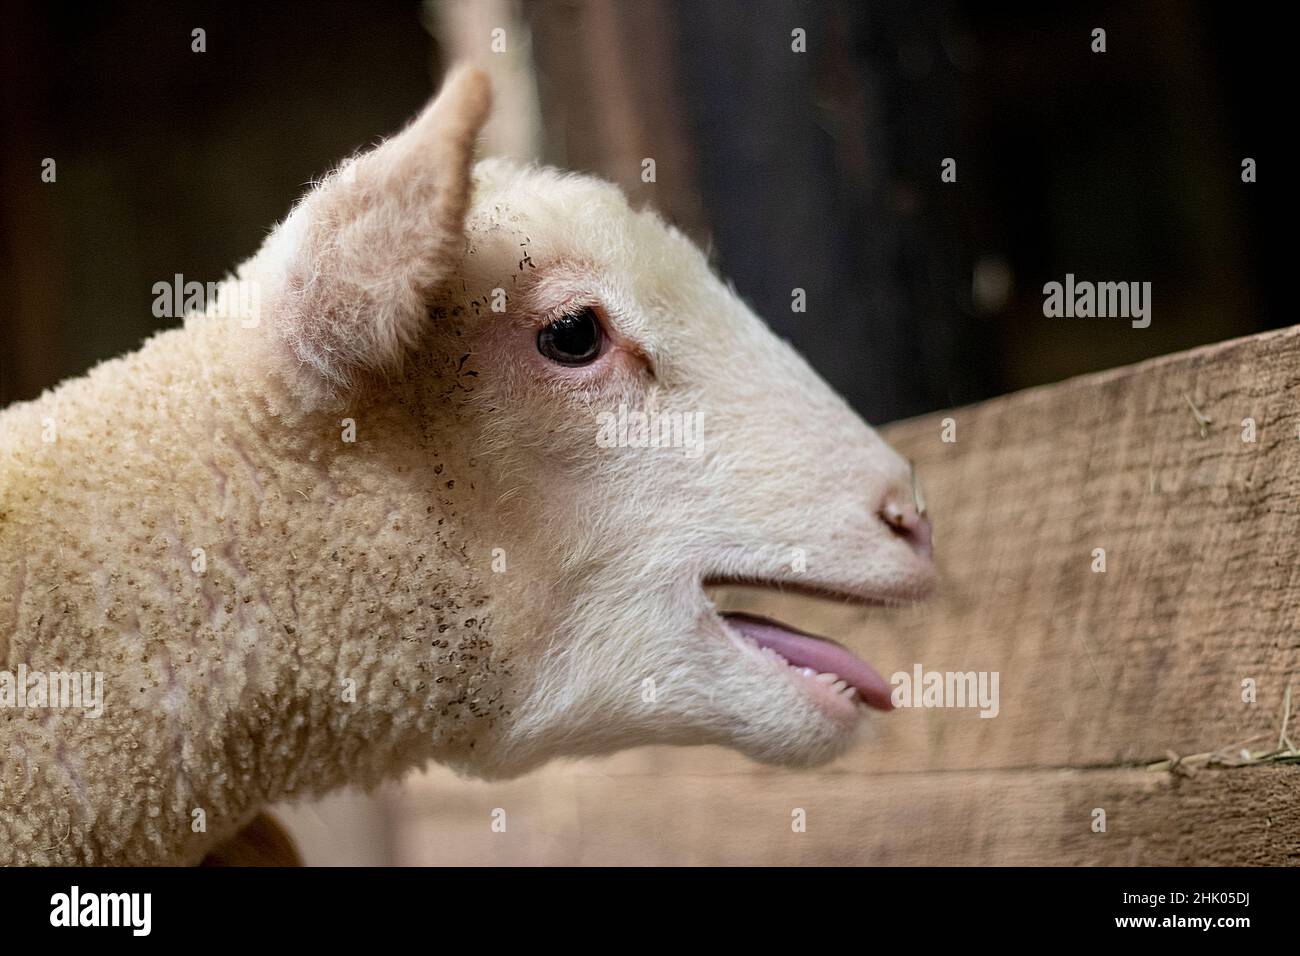 Baby lamb Bleating or Baaing for the mother ewe or sheep in the barn with his tongue sticking out Stock Photo